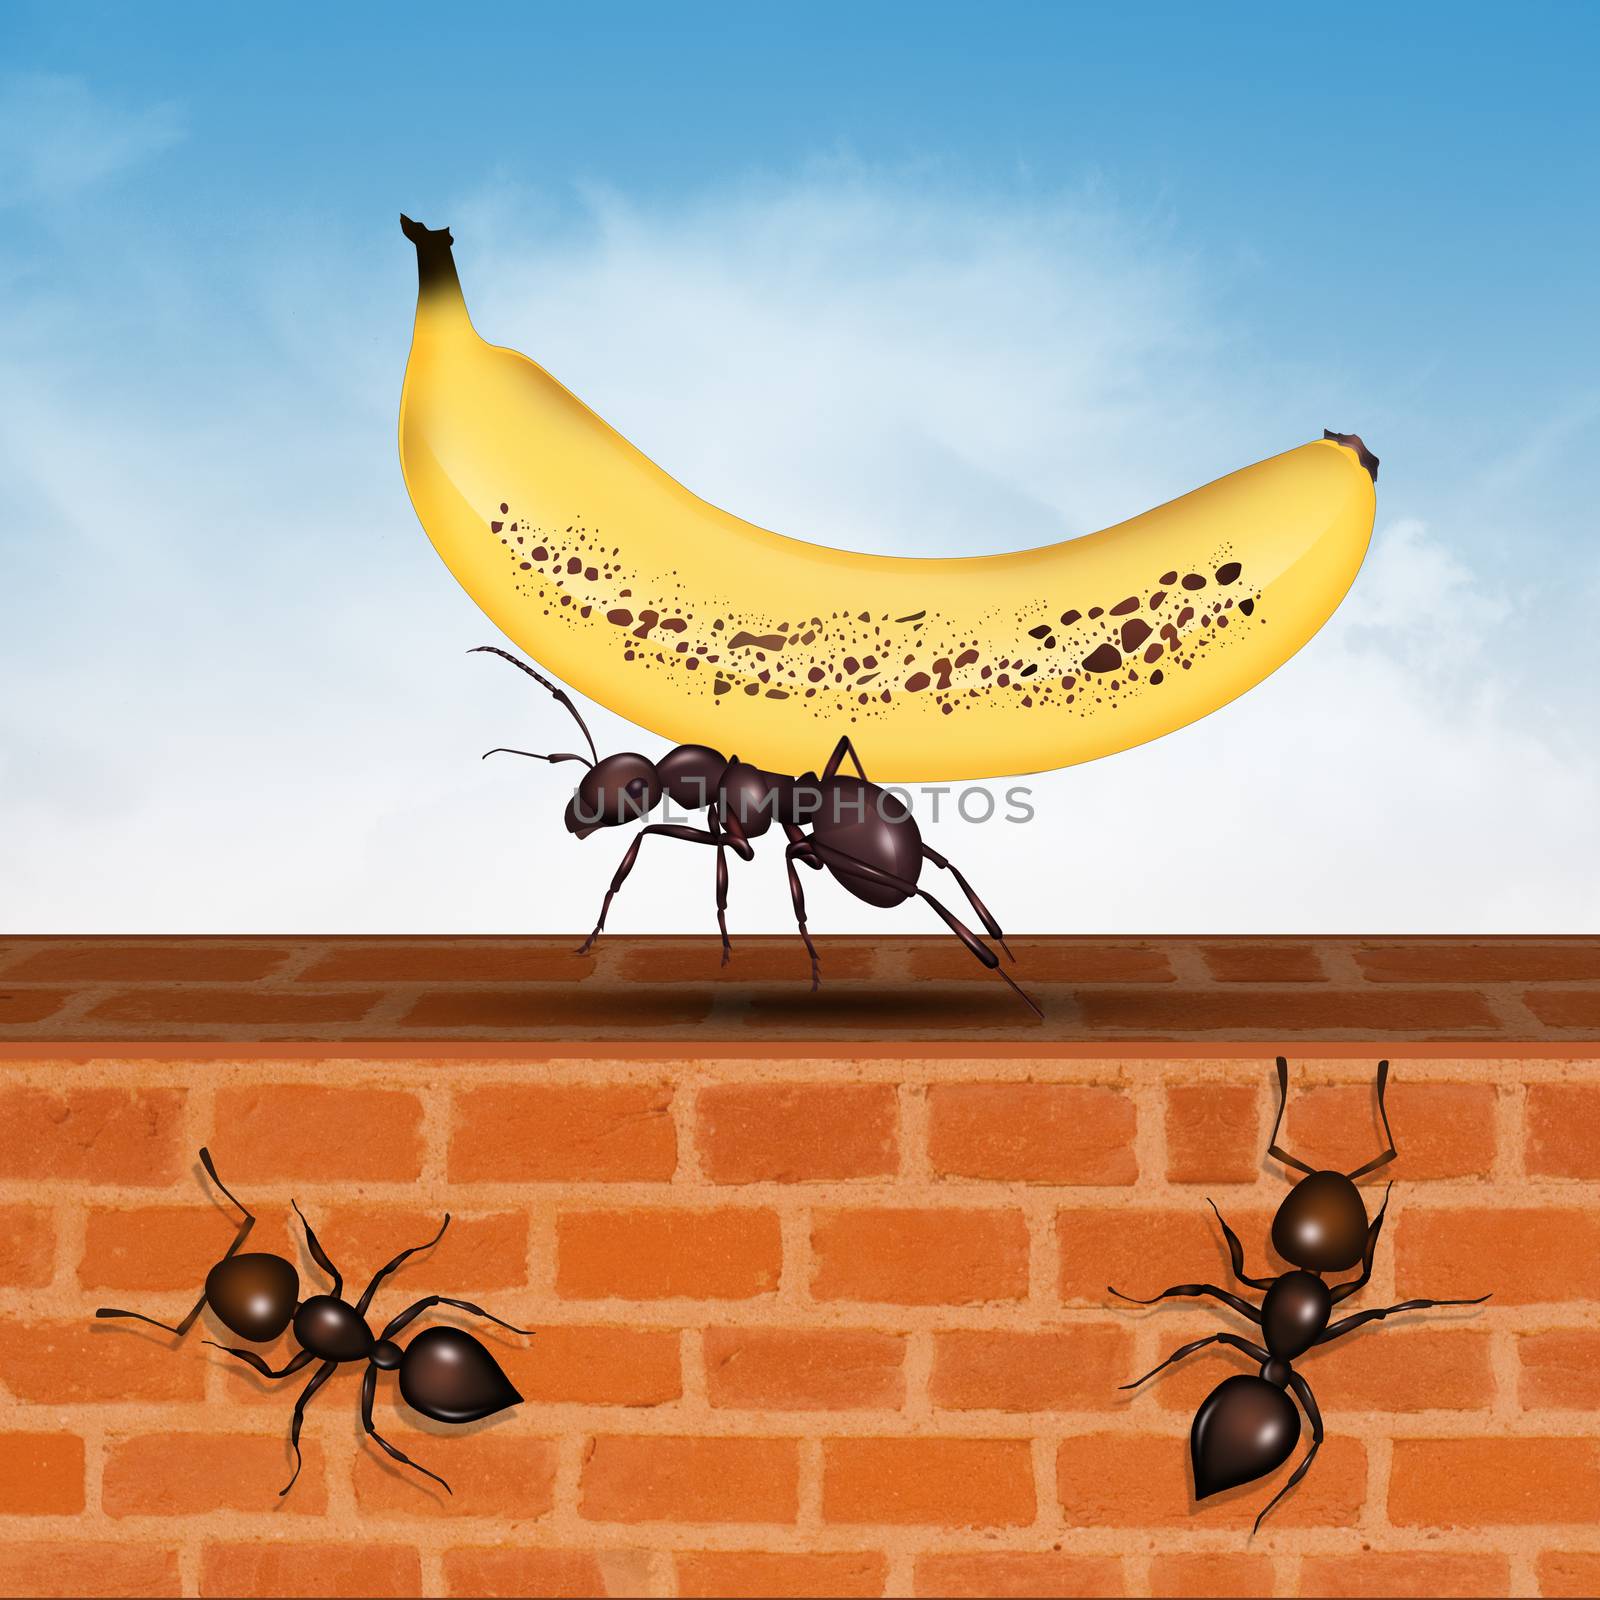 illustration of ant with banana by adrenalina